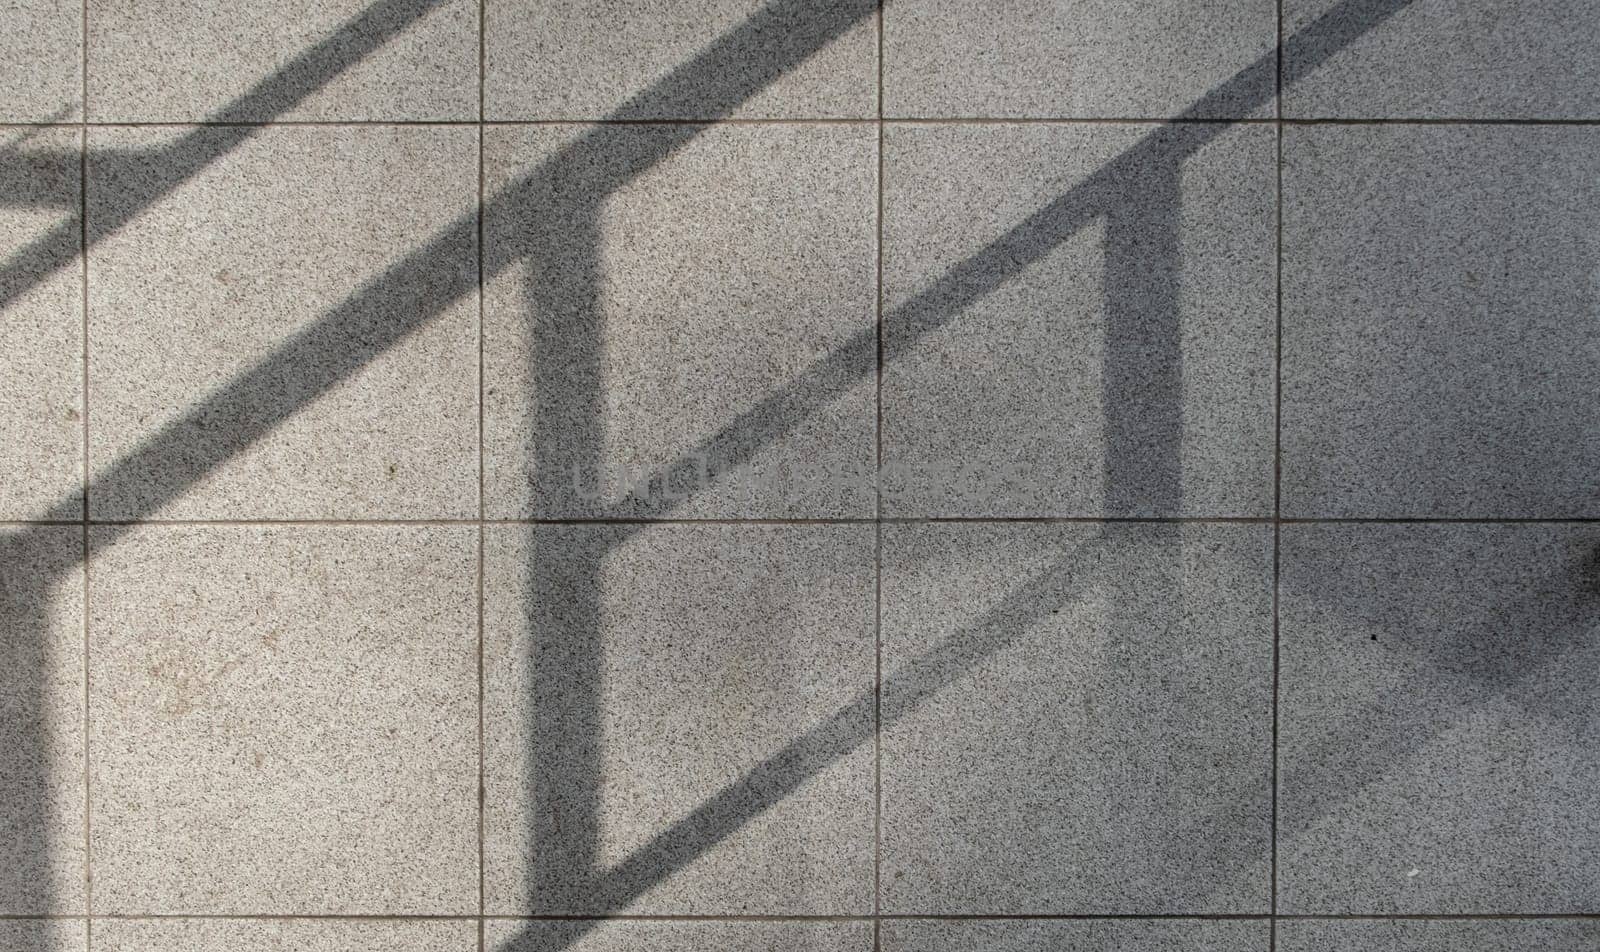 shadows on the ground. abstract texture pattern. lines and symmetry